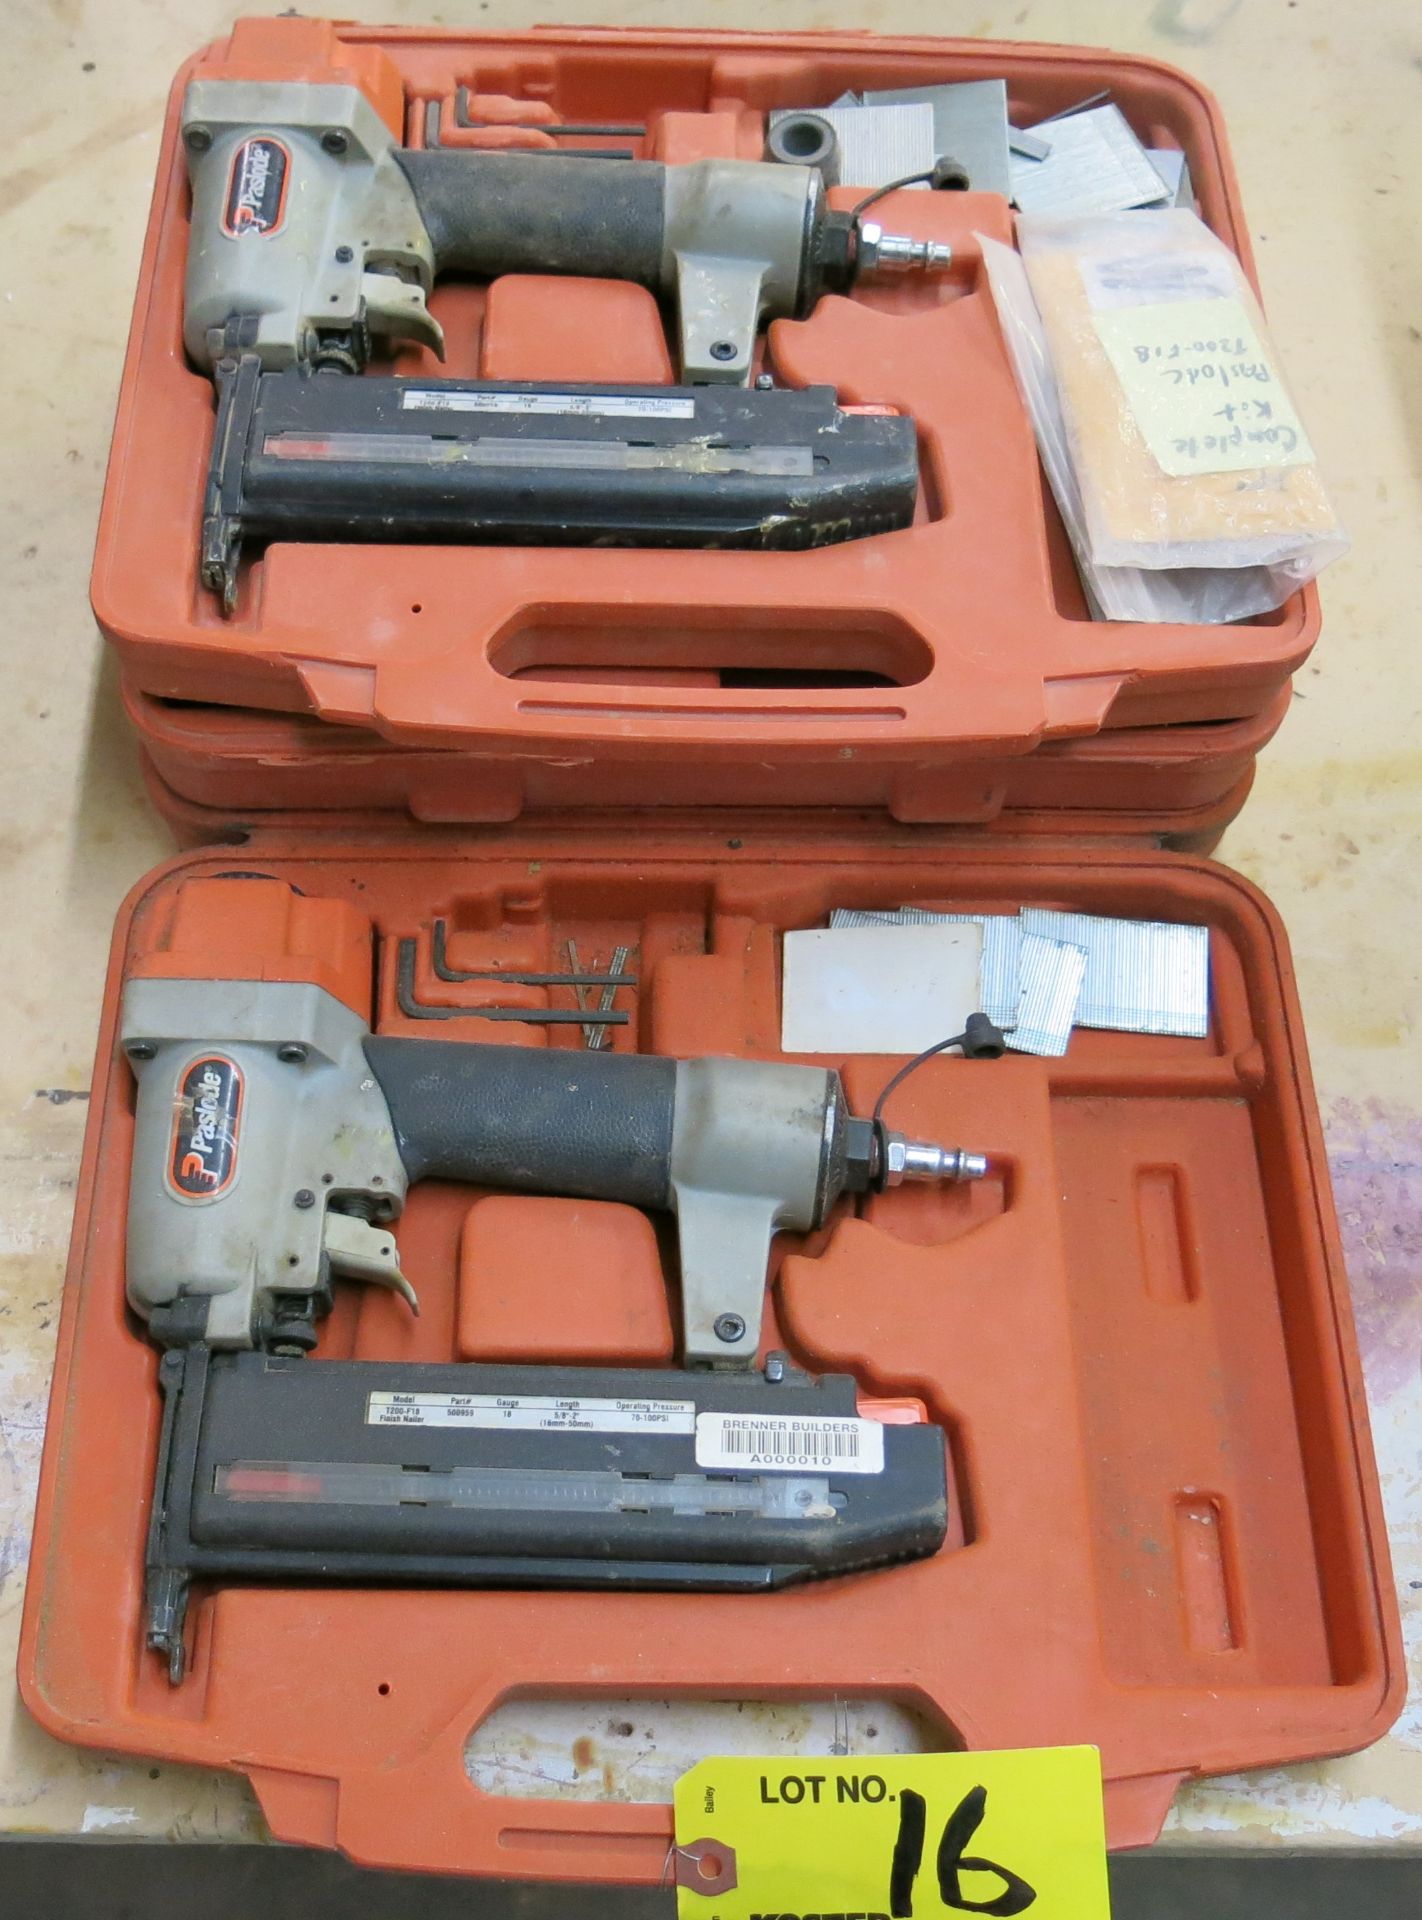 (2) PASLODE MDL. T200-F18 PNEUMATIC BRAD NAILERS